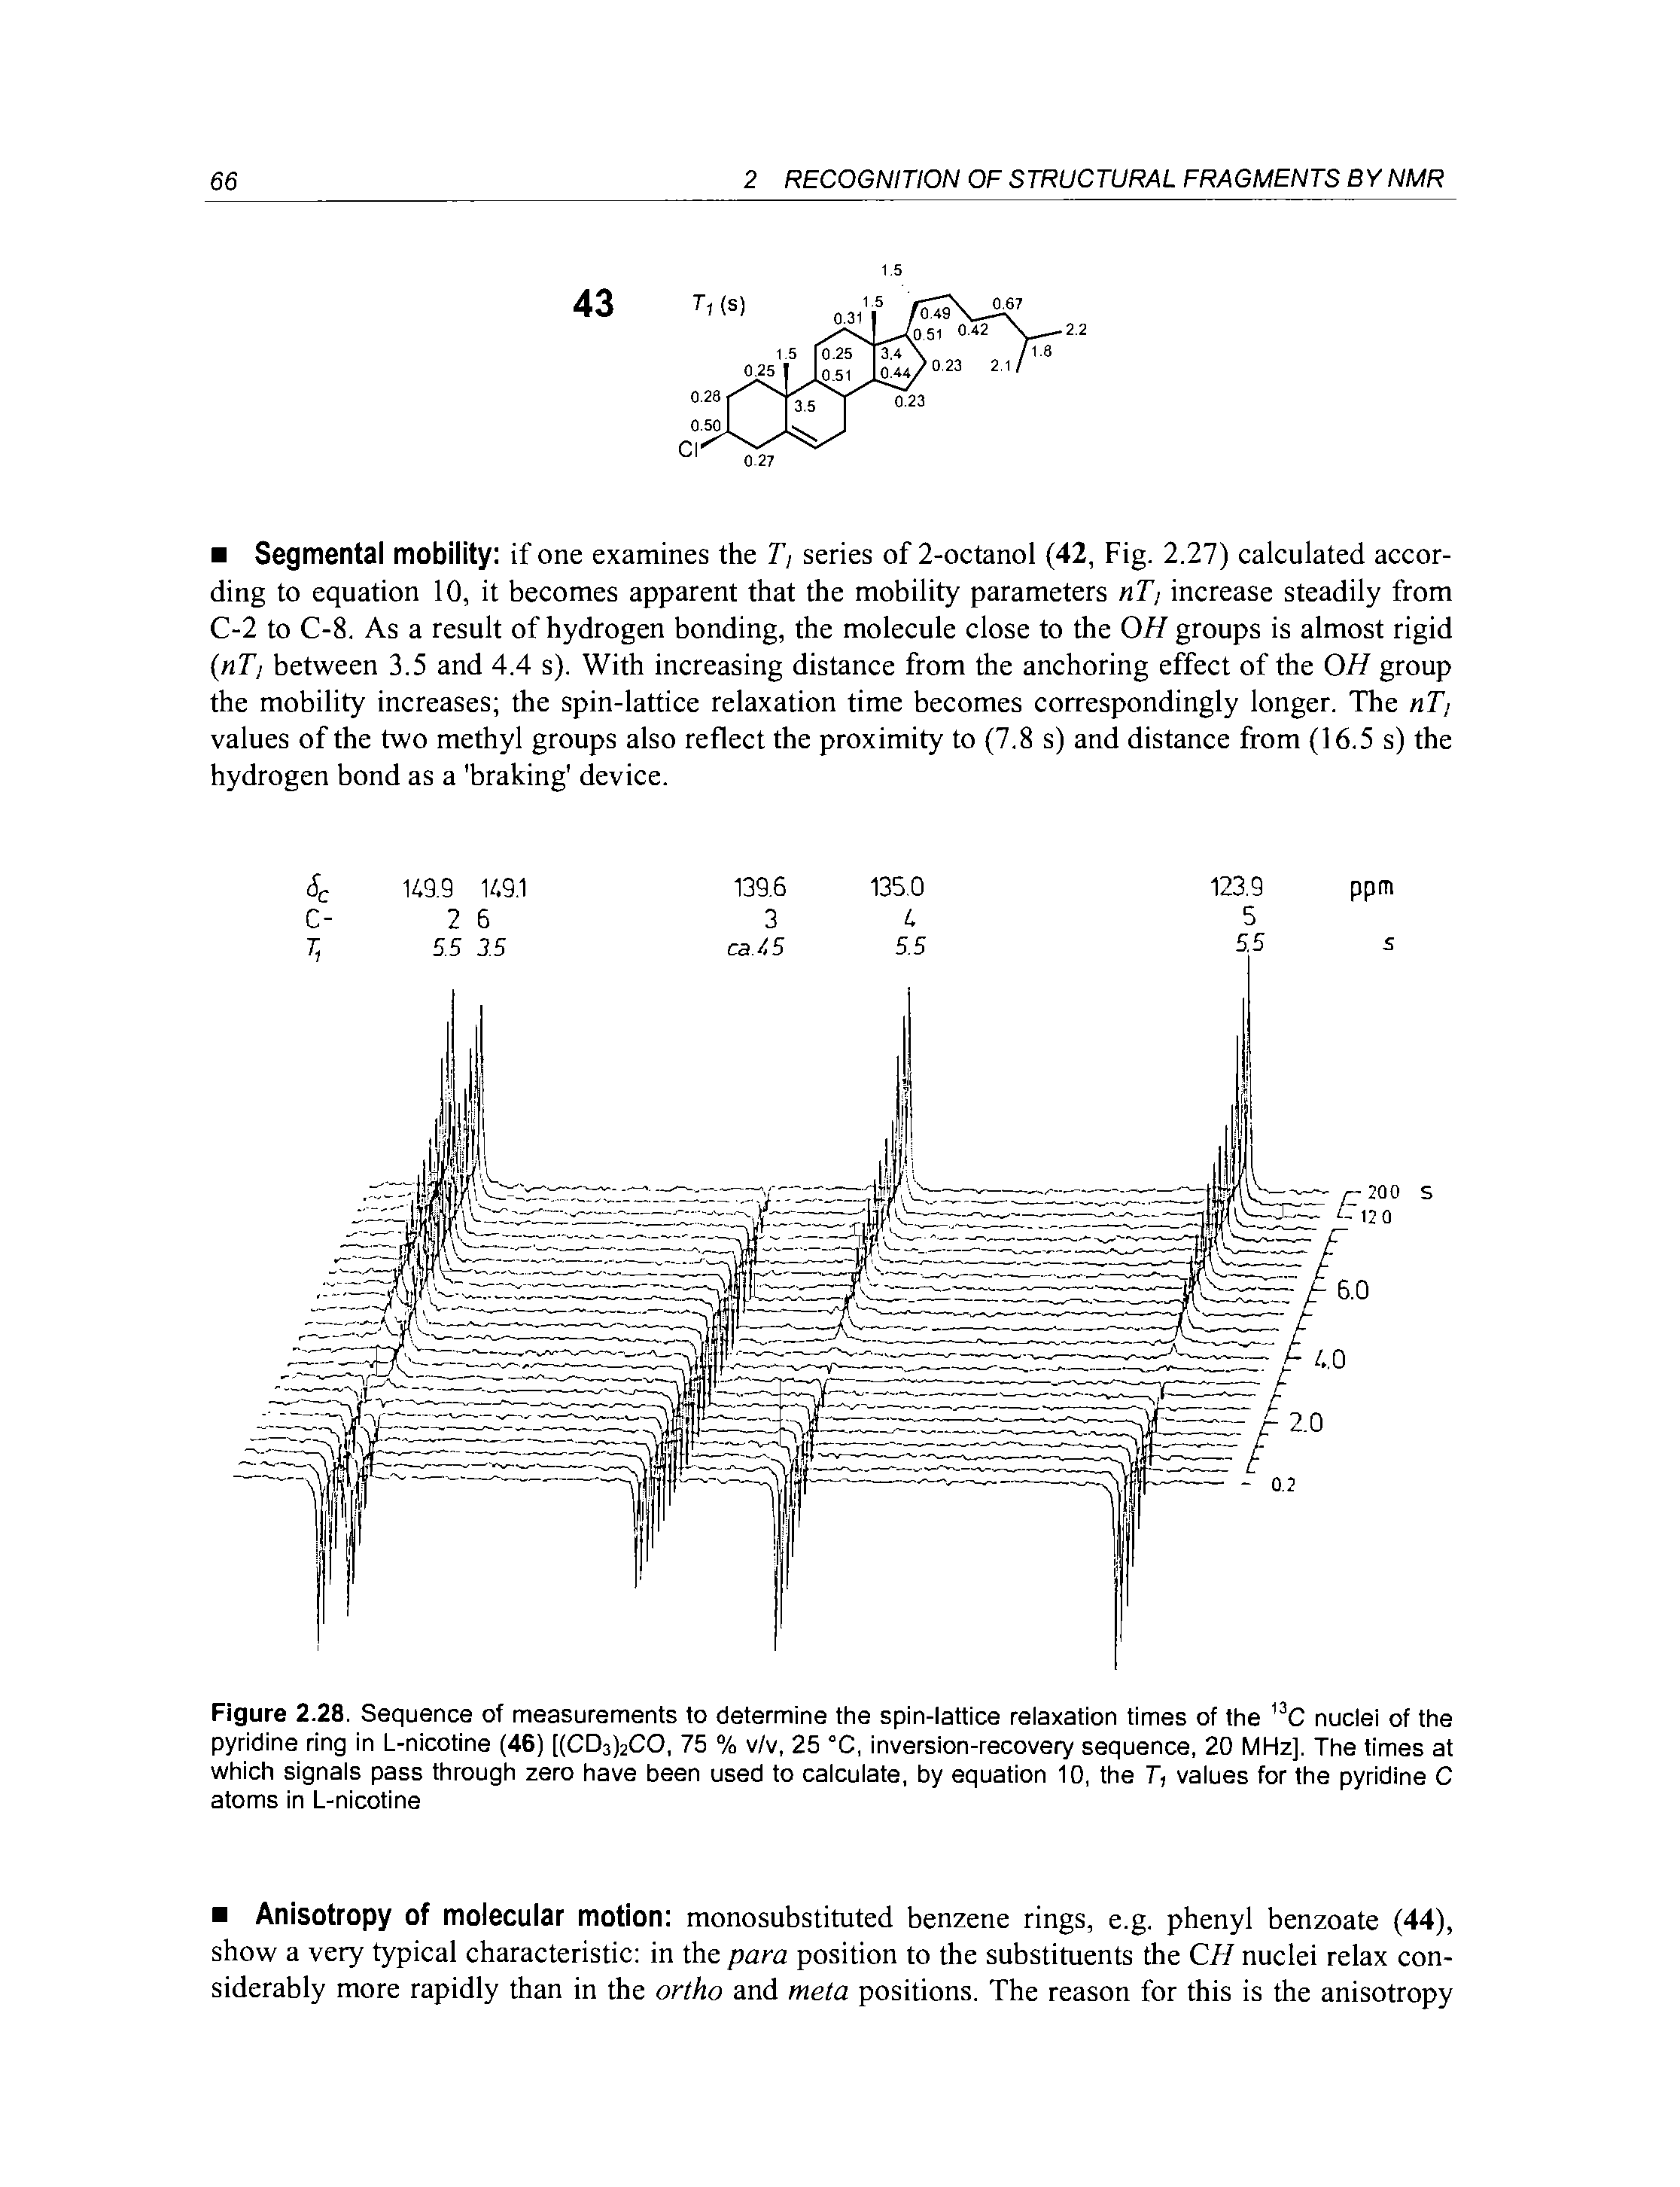 Figure 2.28. Sequence of measurements to determine the spin-lattice relaxation times of the C nuclei of the pyridine ring in L-nicotine (46) [(CD3)2CO, 75 % v/v, 25 °C, inversion-recovery sequence, 20 MHz], The times at which signals pass through zero have been used to calculate, by equation 10, the T, values for the pyridine C atoms in L-nicotine...